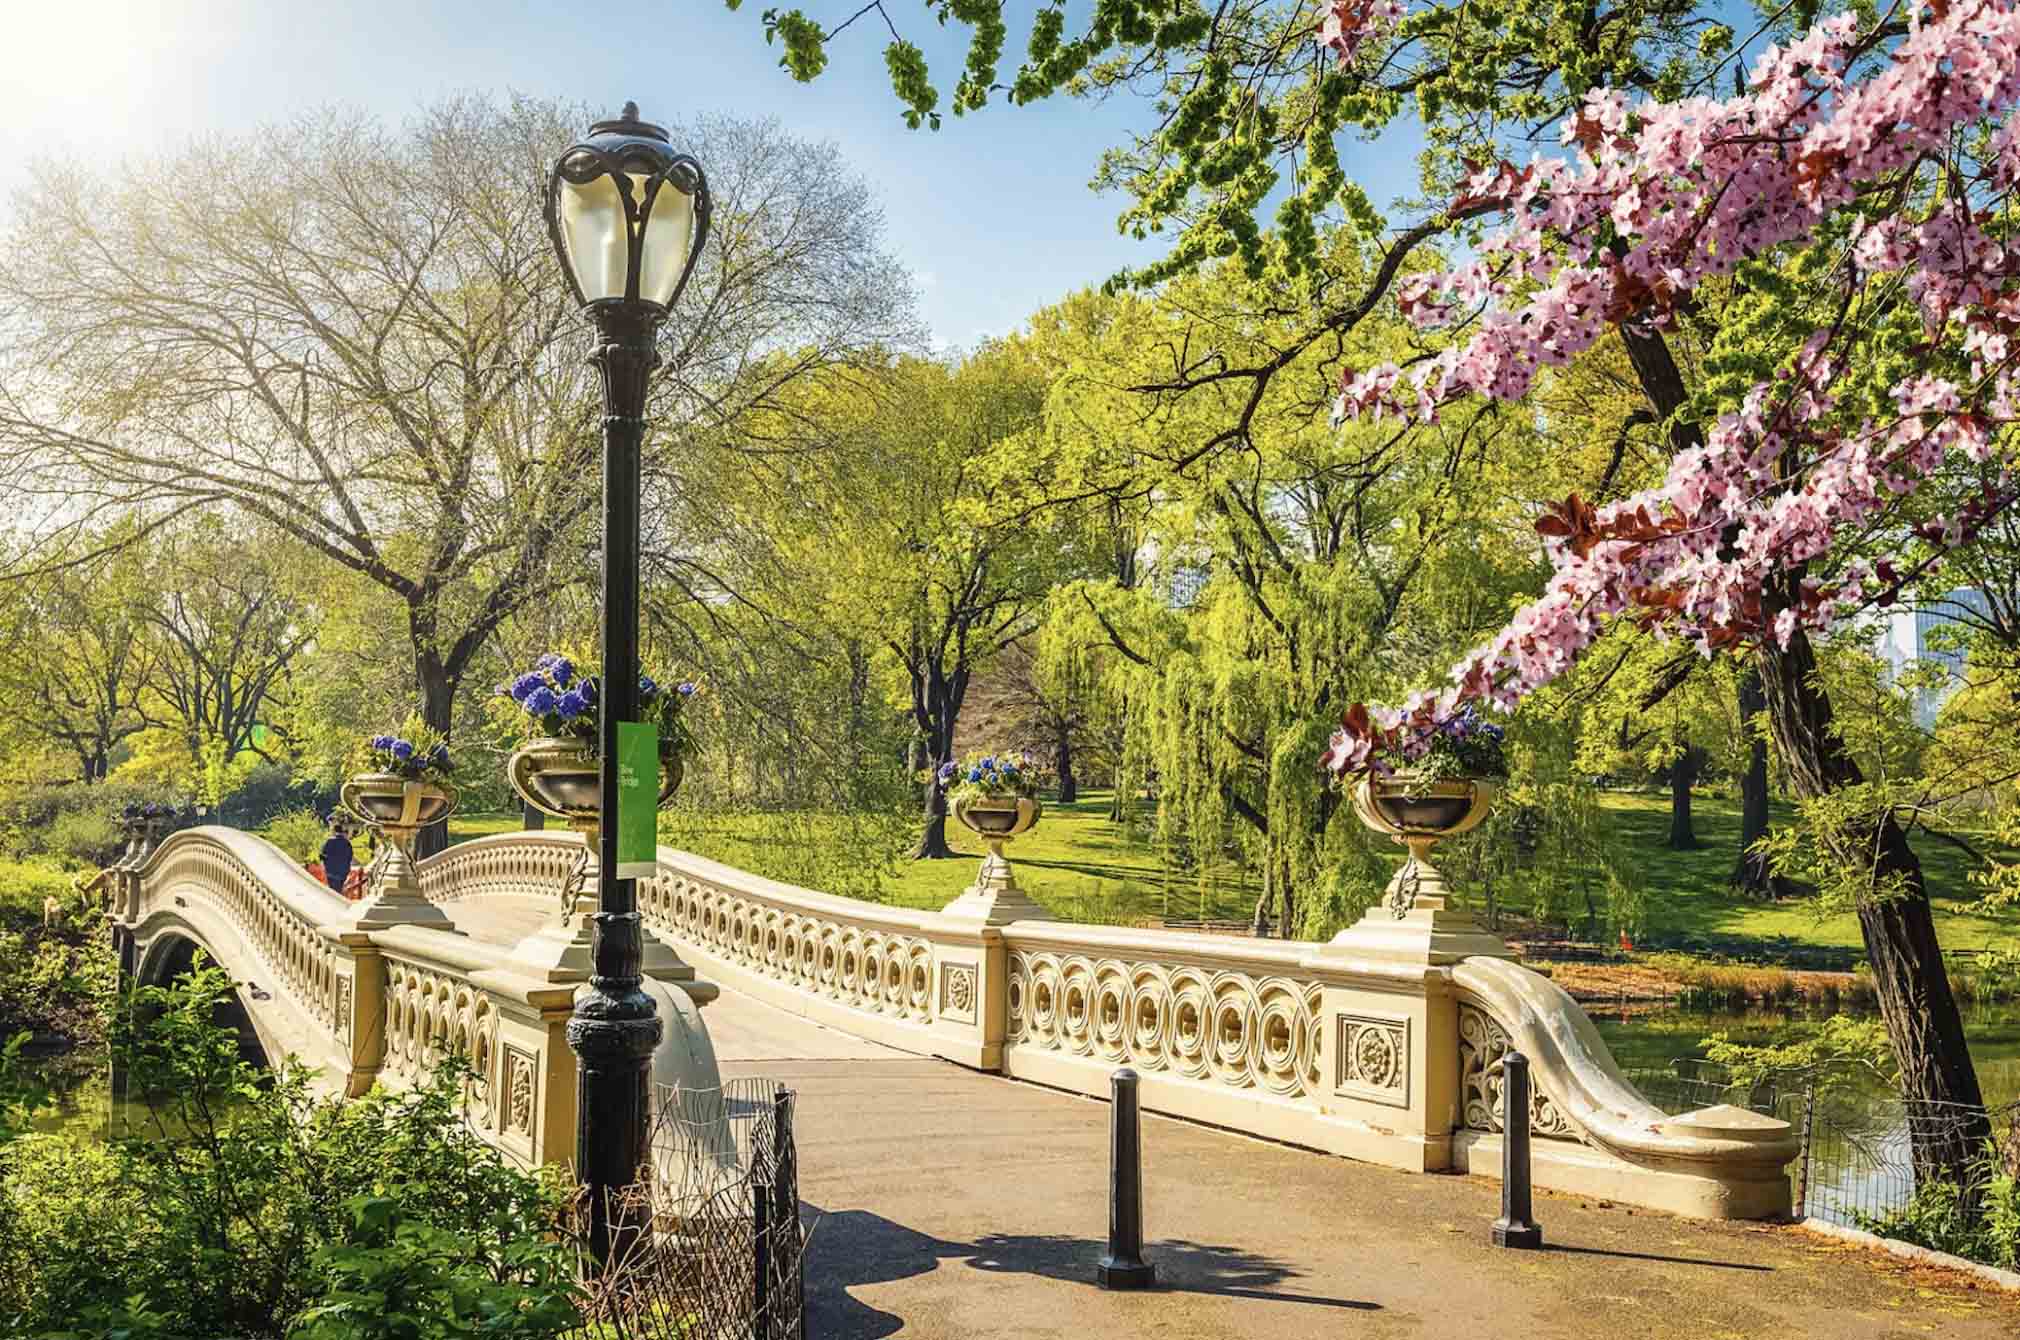 Bridge in Central Park, surrounded by trees and foliage